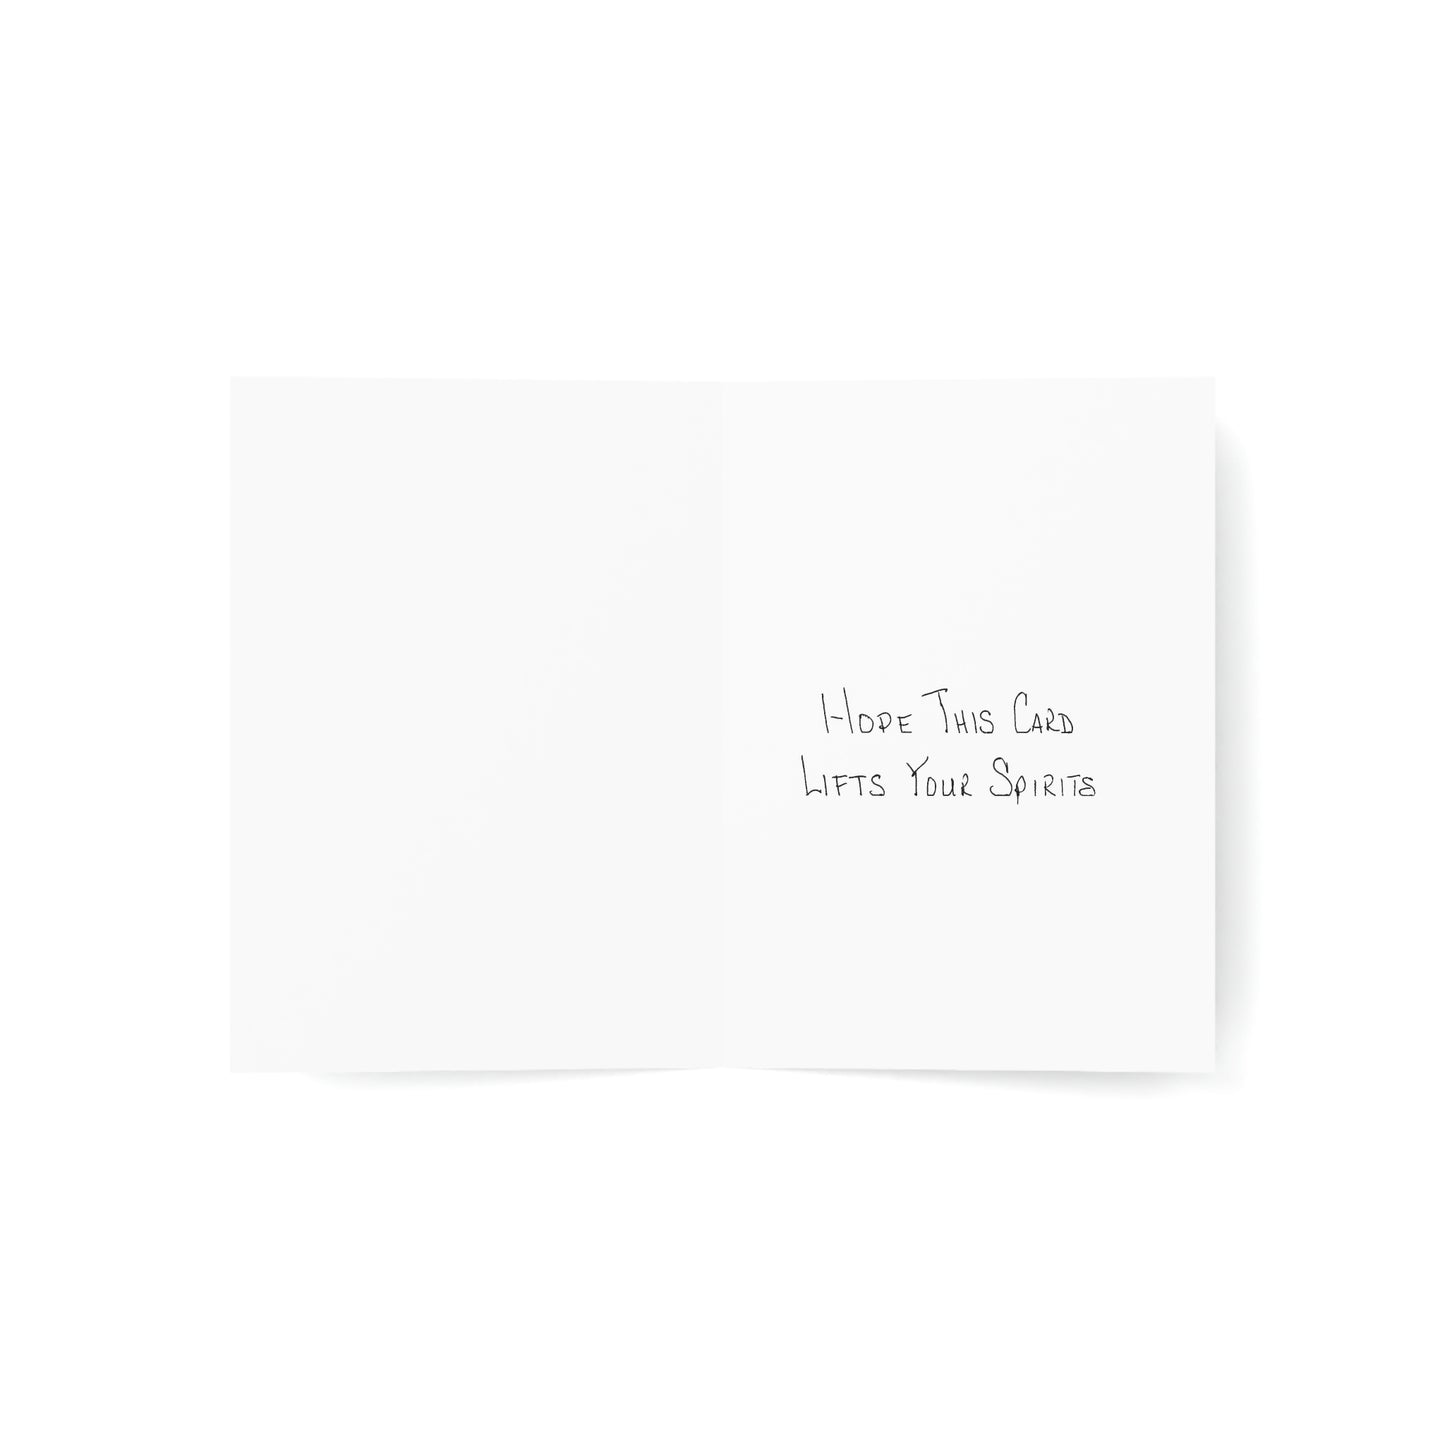 Support/Encouragement - Hope this Card Lifts Your Spirits